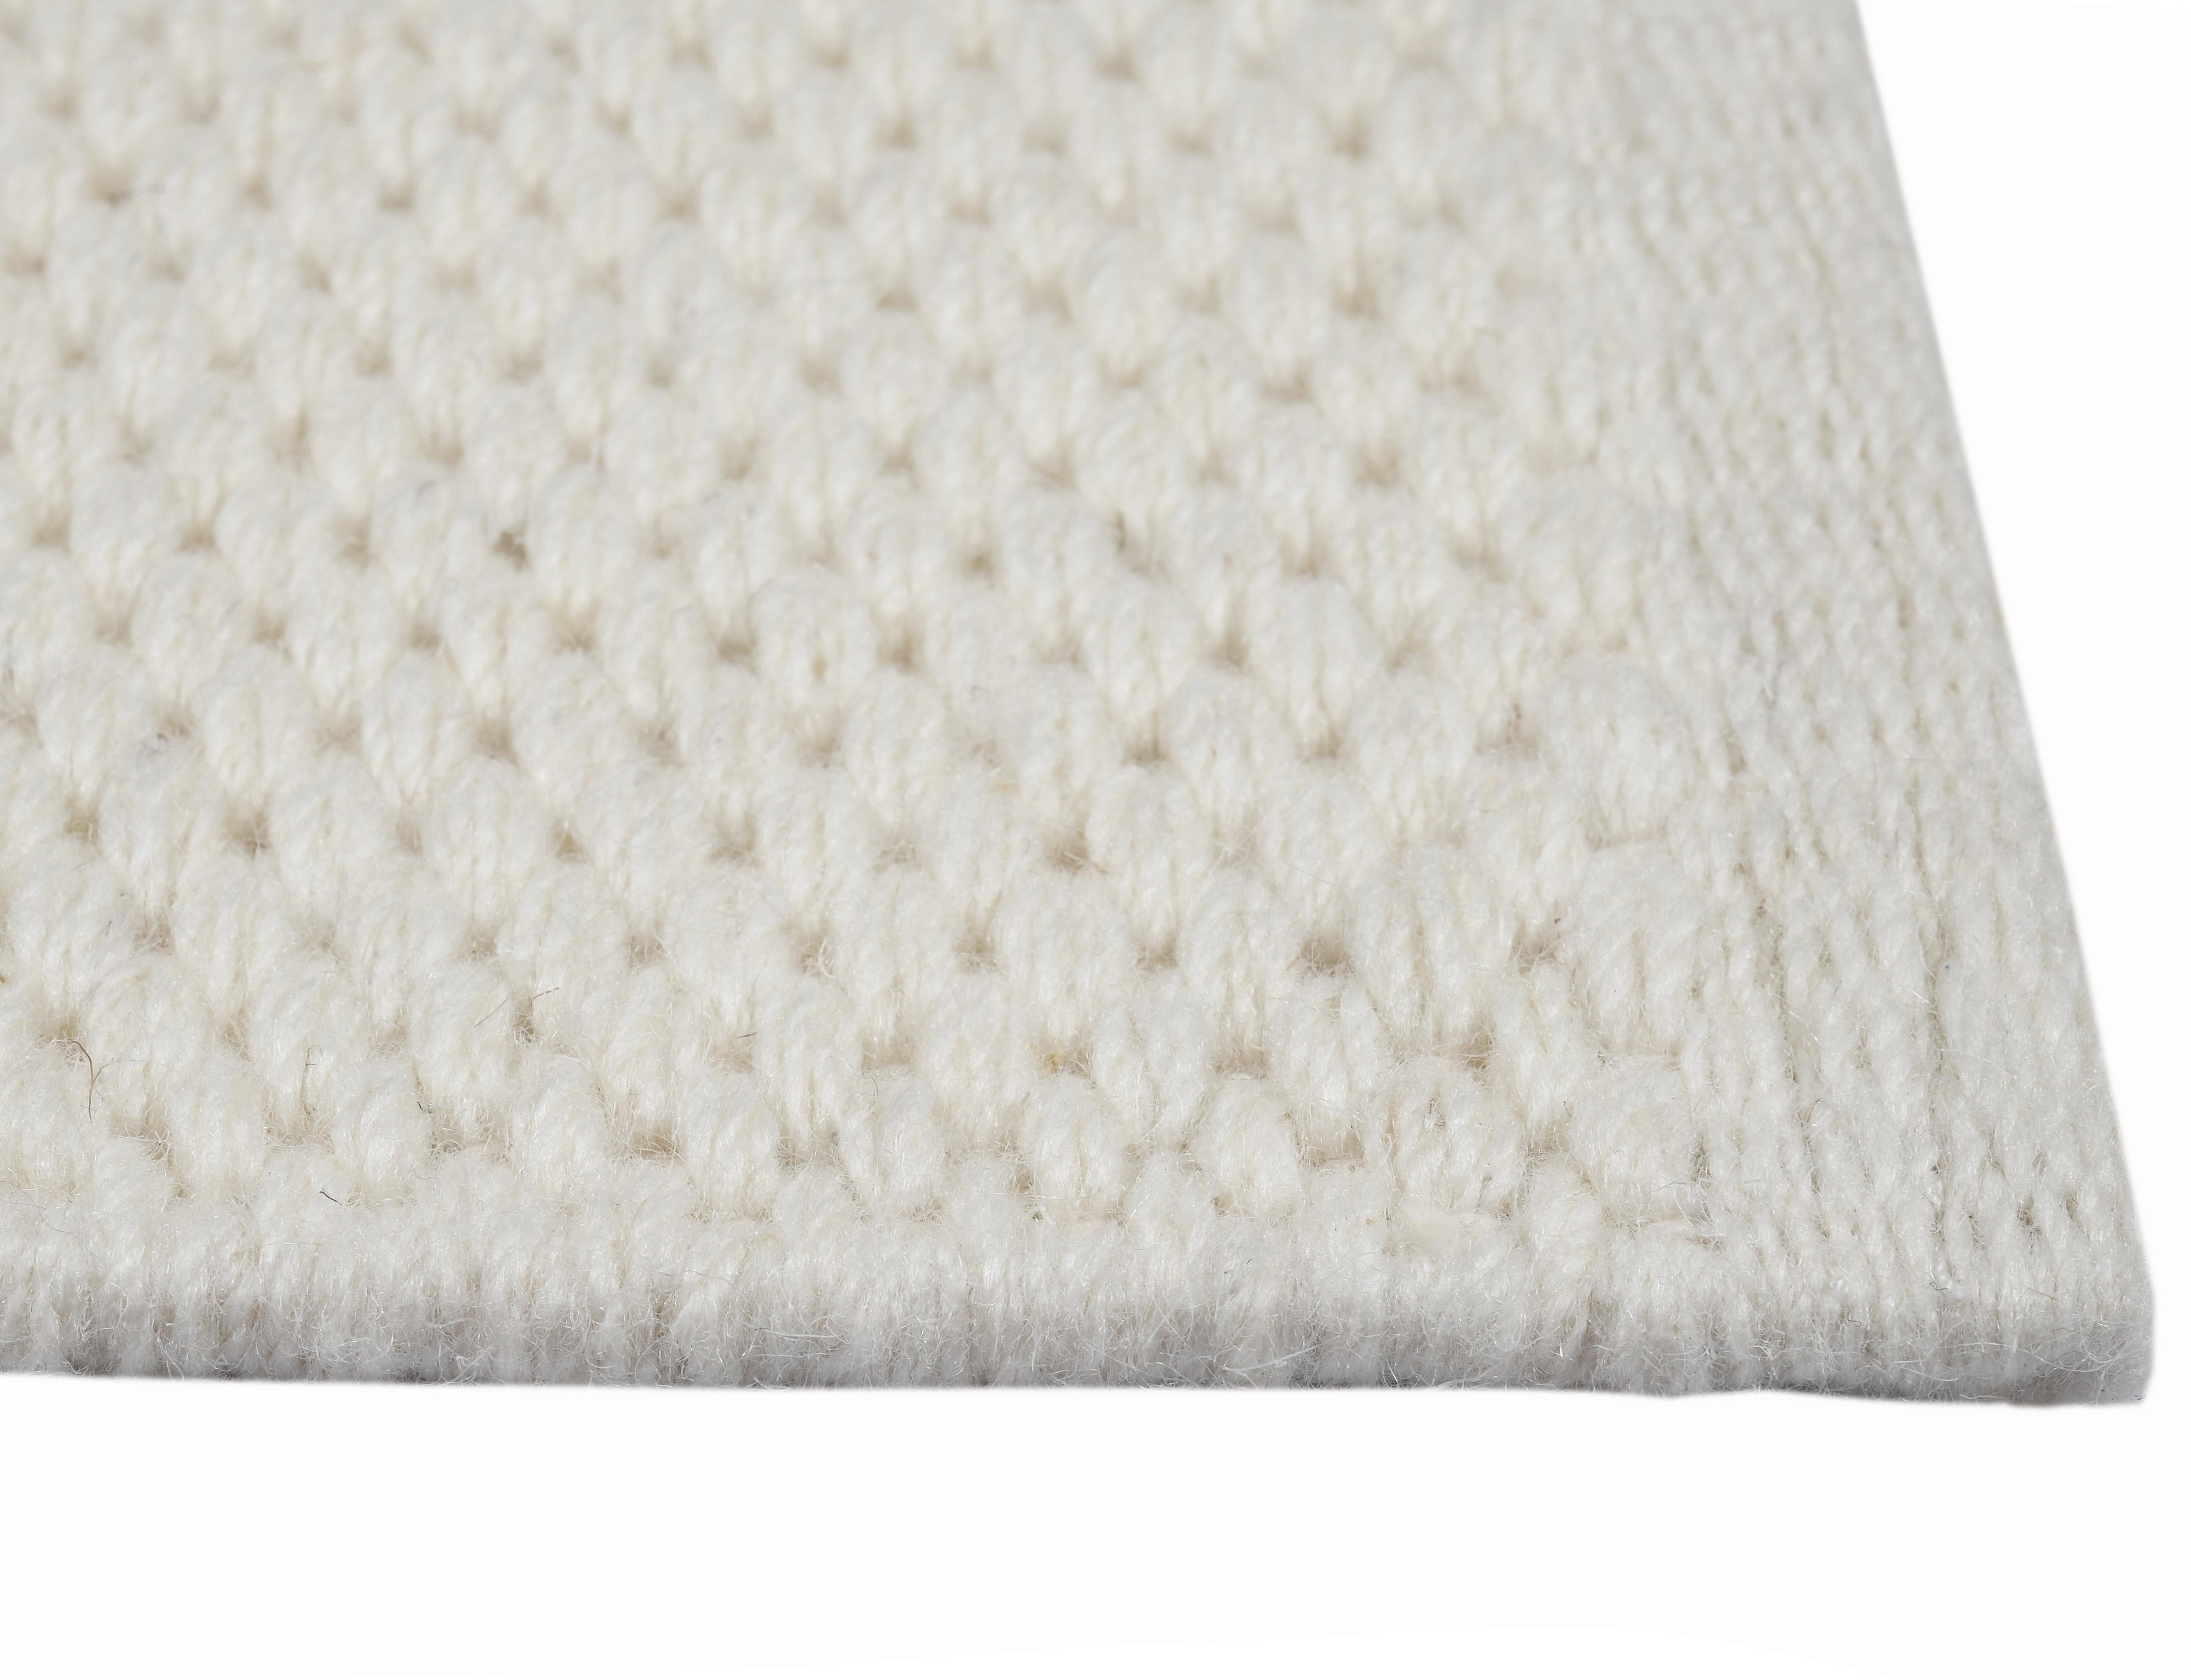 Hand-Woven Quies, Ivory, Handwoven, New Zealand and Mediterranean wools, 6' x 9' For Sale